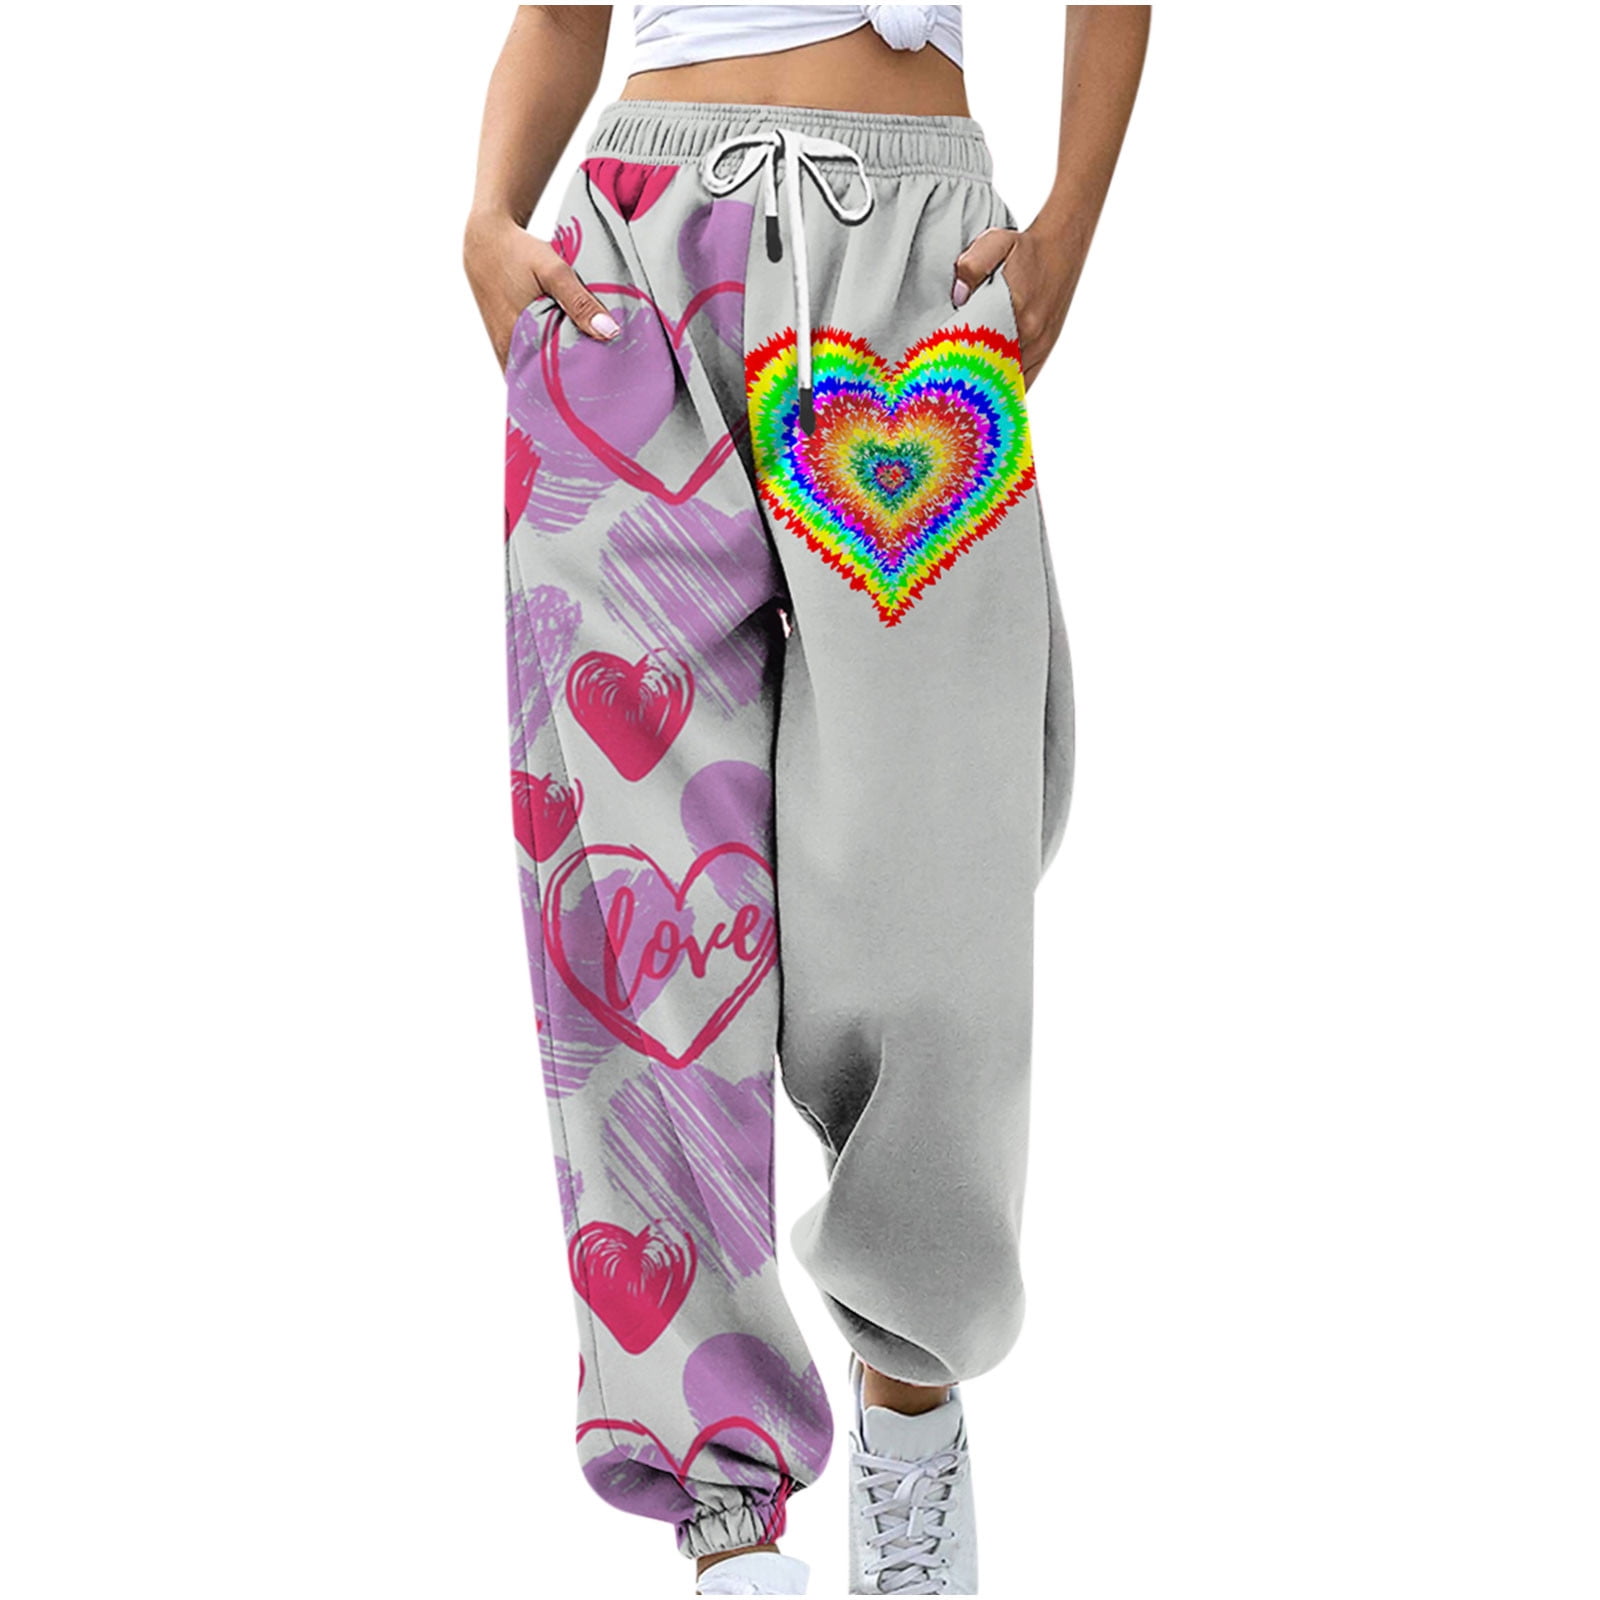 HTNBO Valentine's Day Sweatpants Graphic for Women Drawstring Love ...